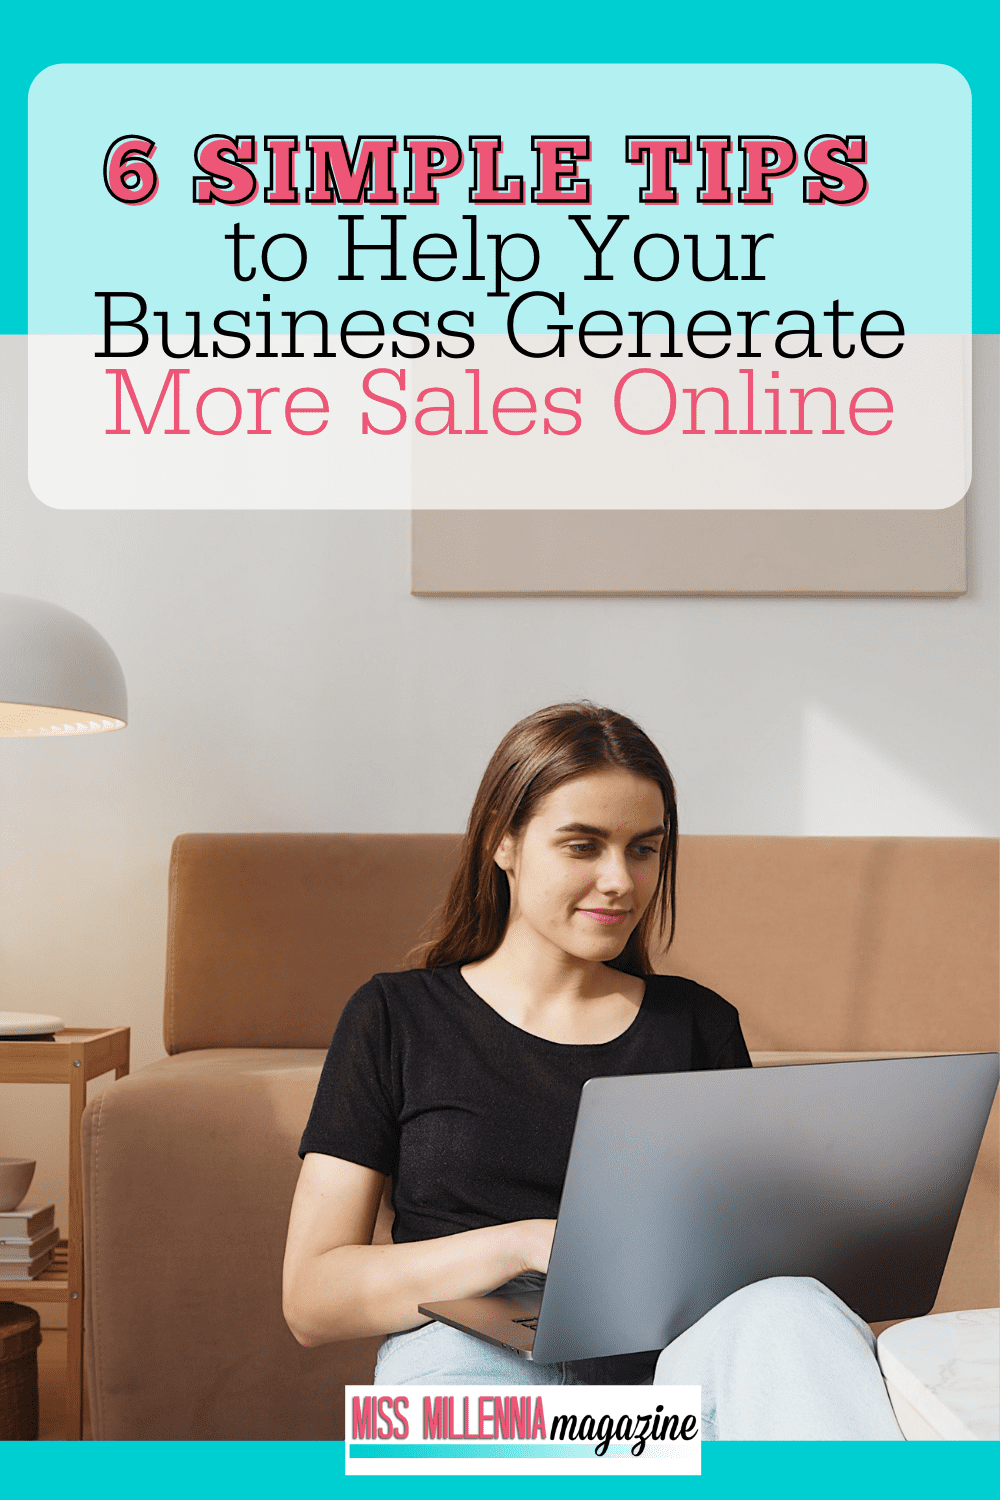 6 Simple Tips to Help Your Business Generate More Sales Online